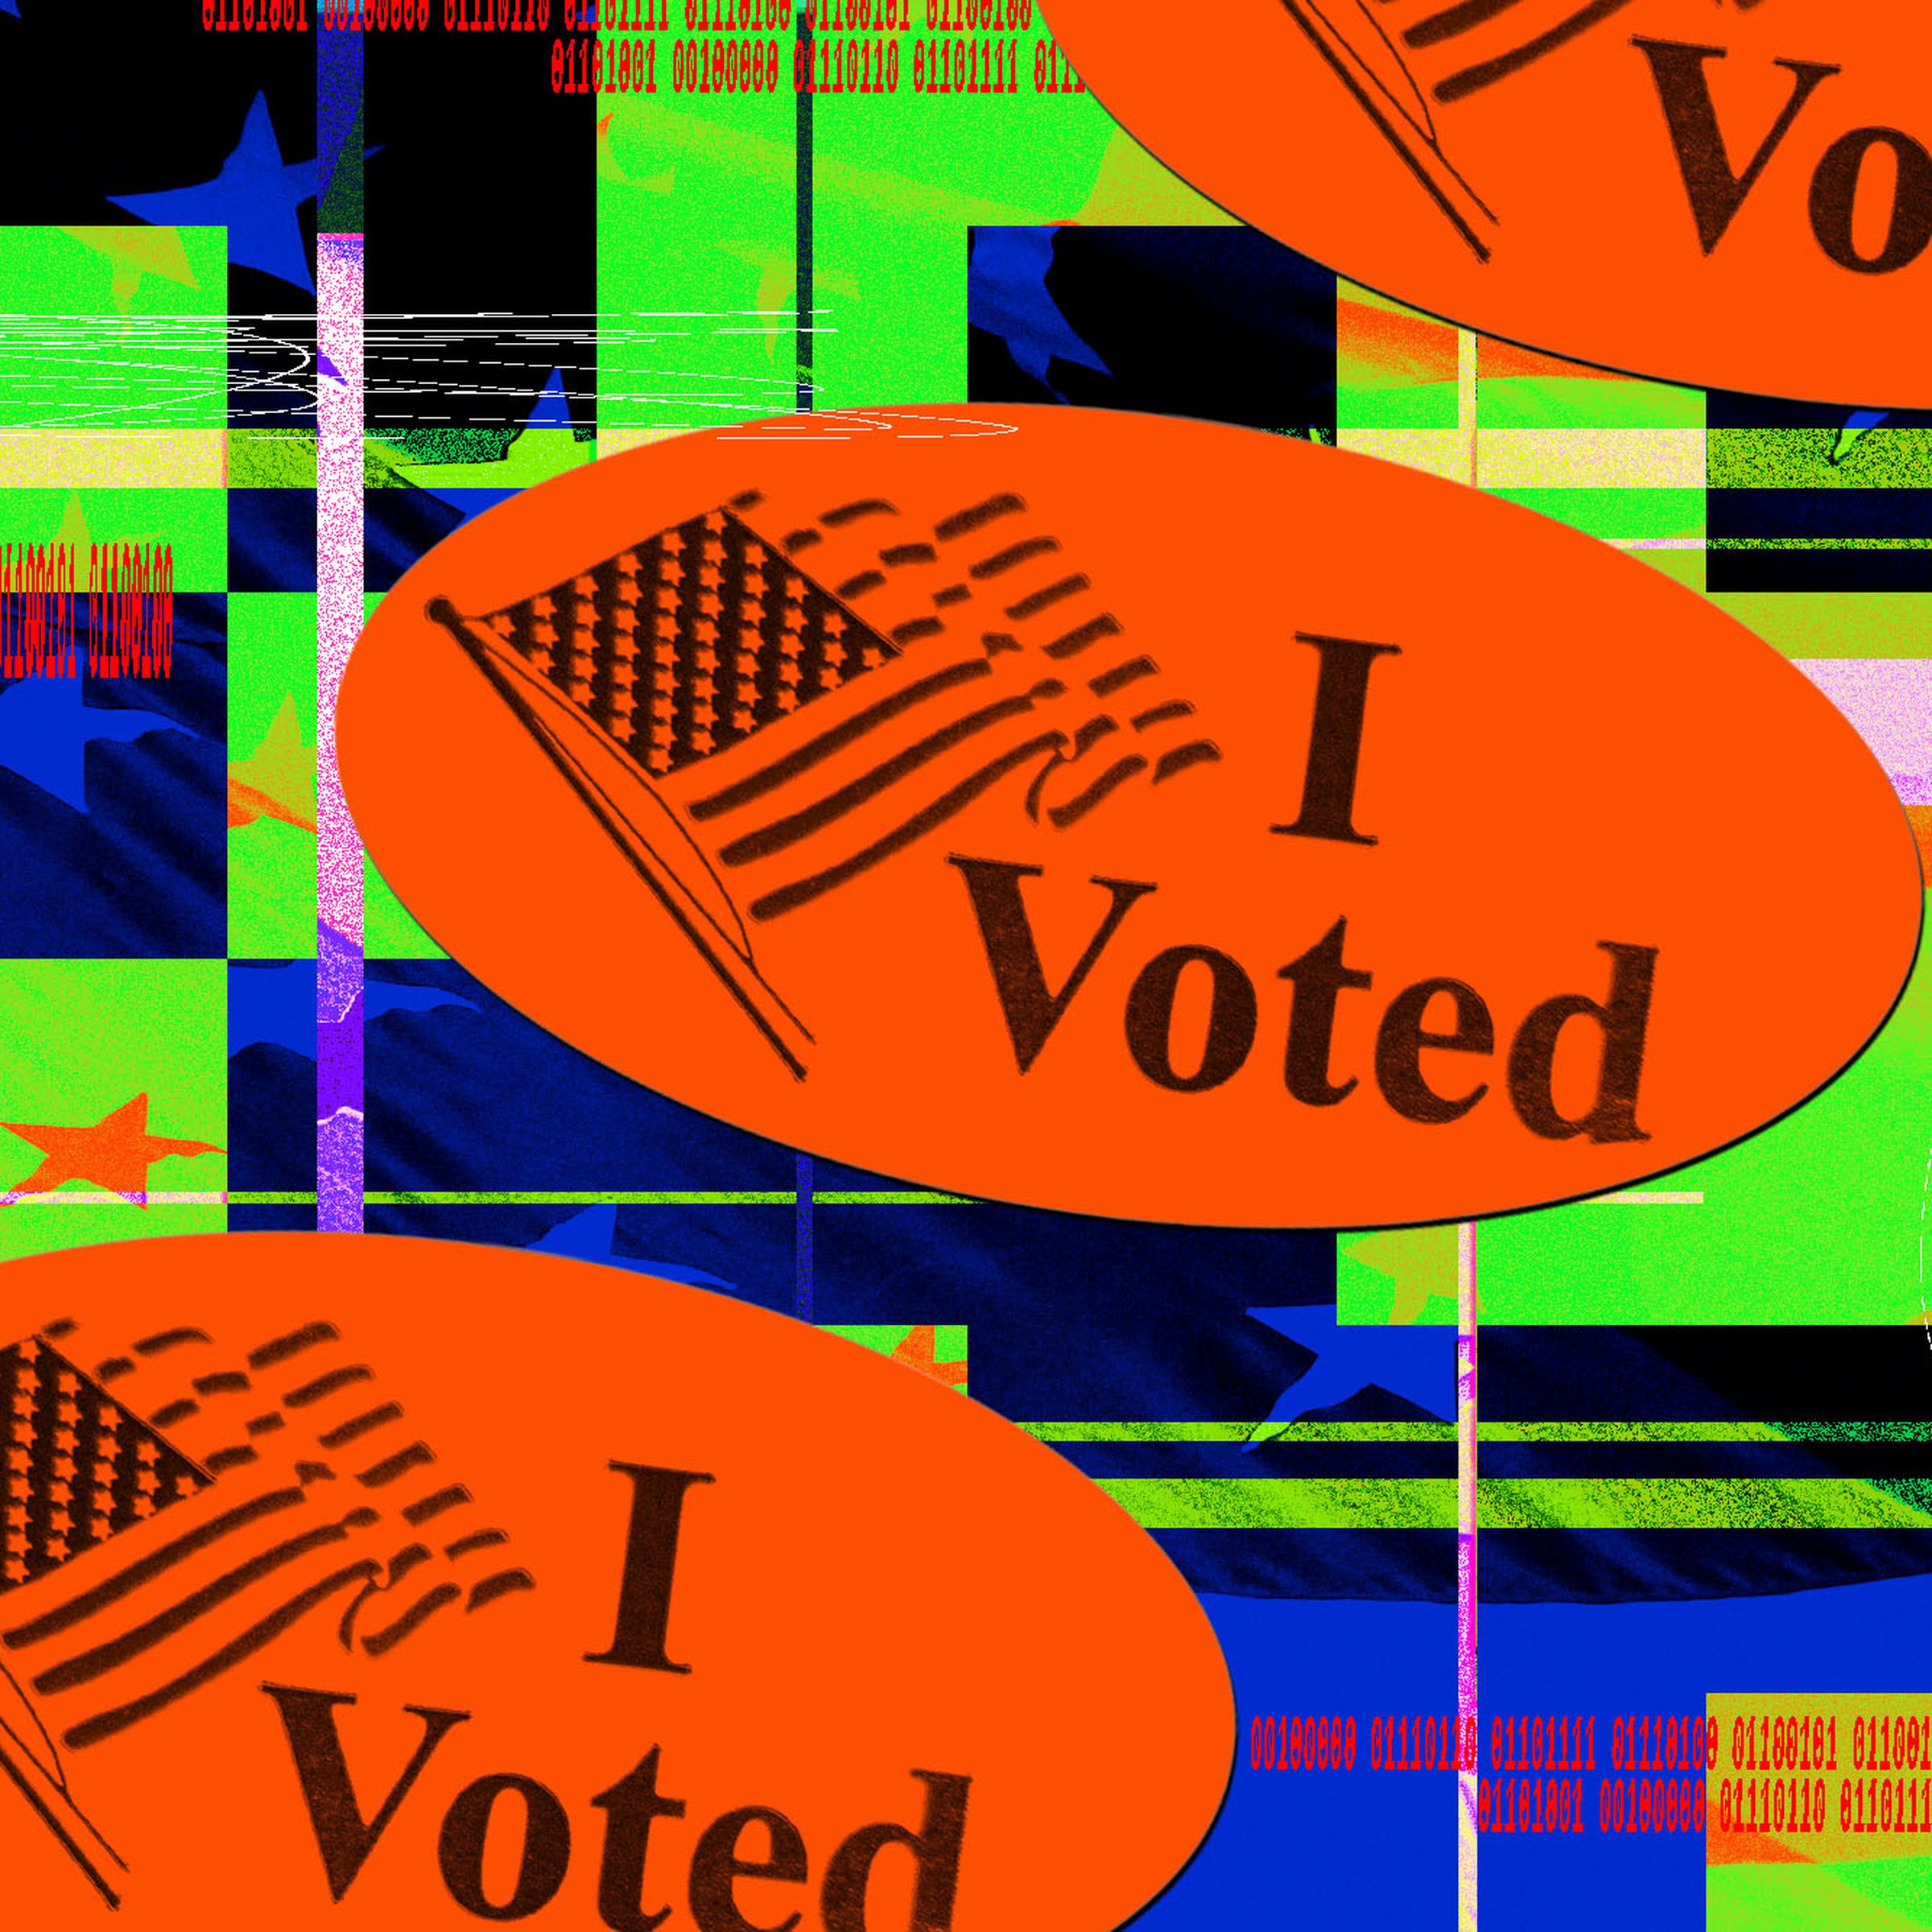 Graphic photo illustration of I Voted stickers.